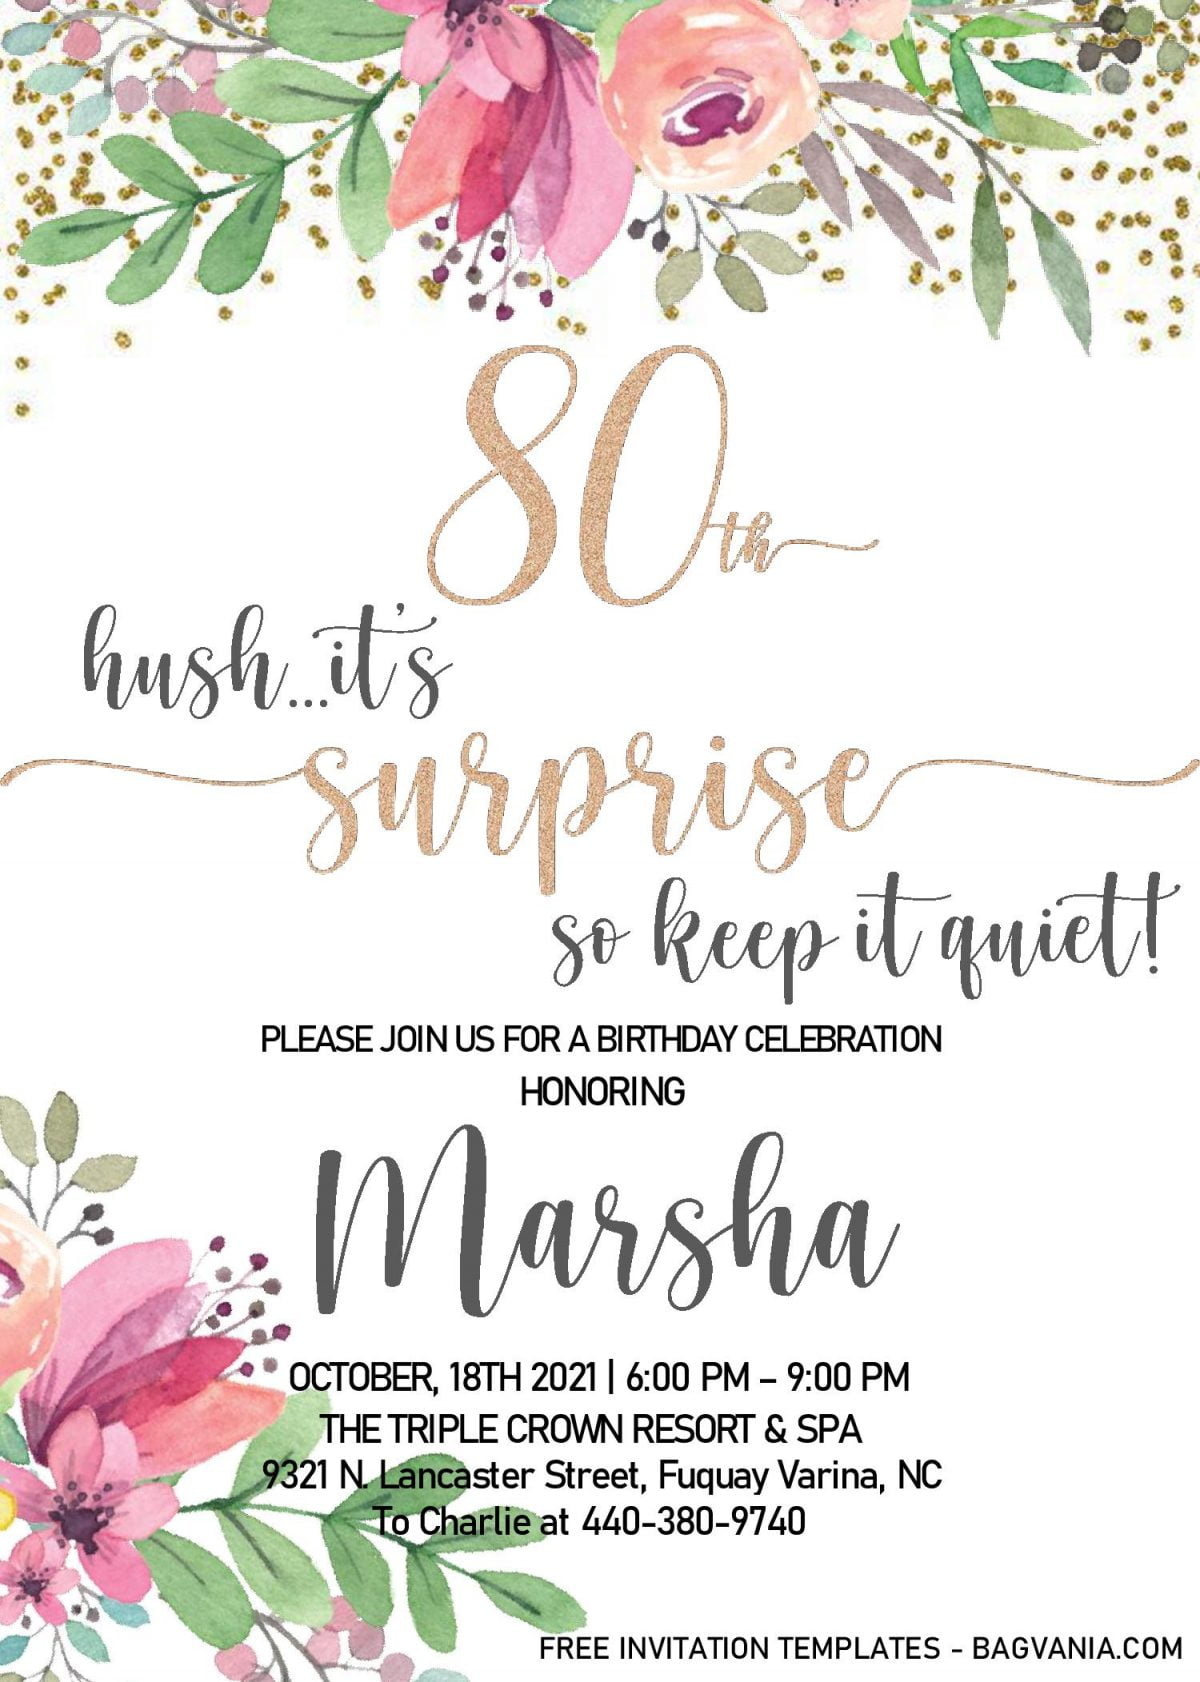 Floral 80th Birthday Invitation Templates - Editable With MS Word and has watercolor floral